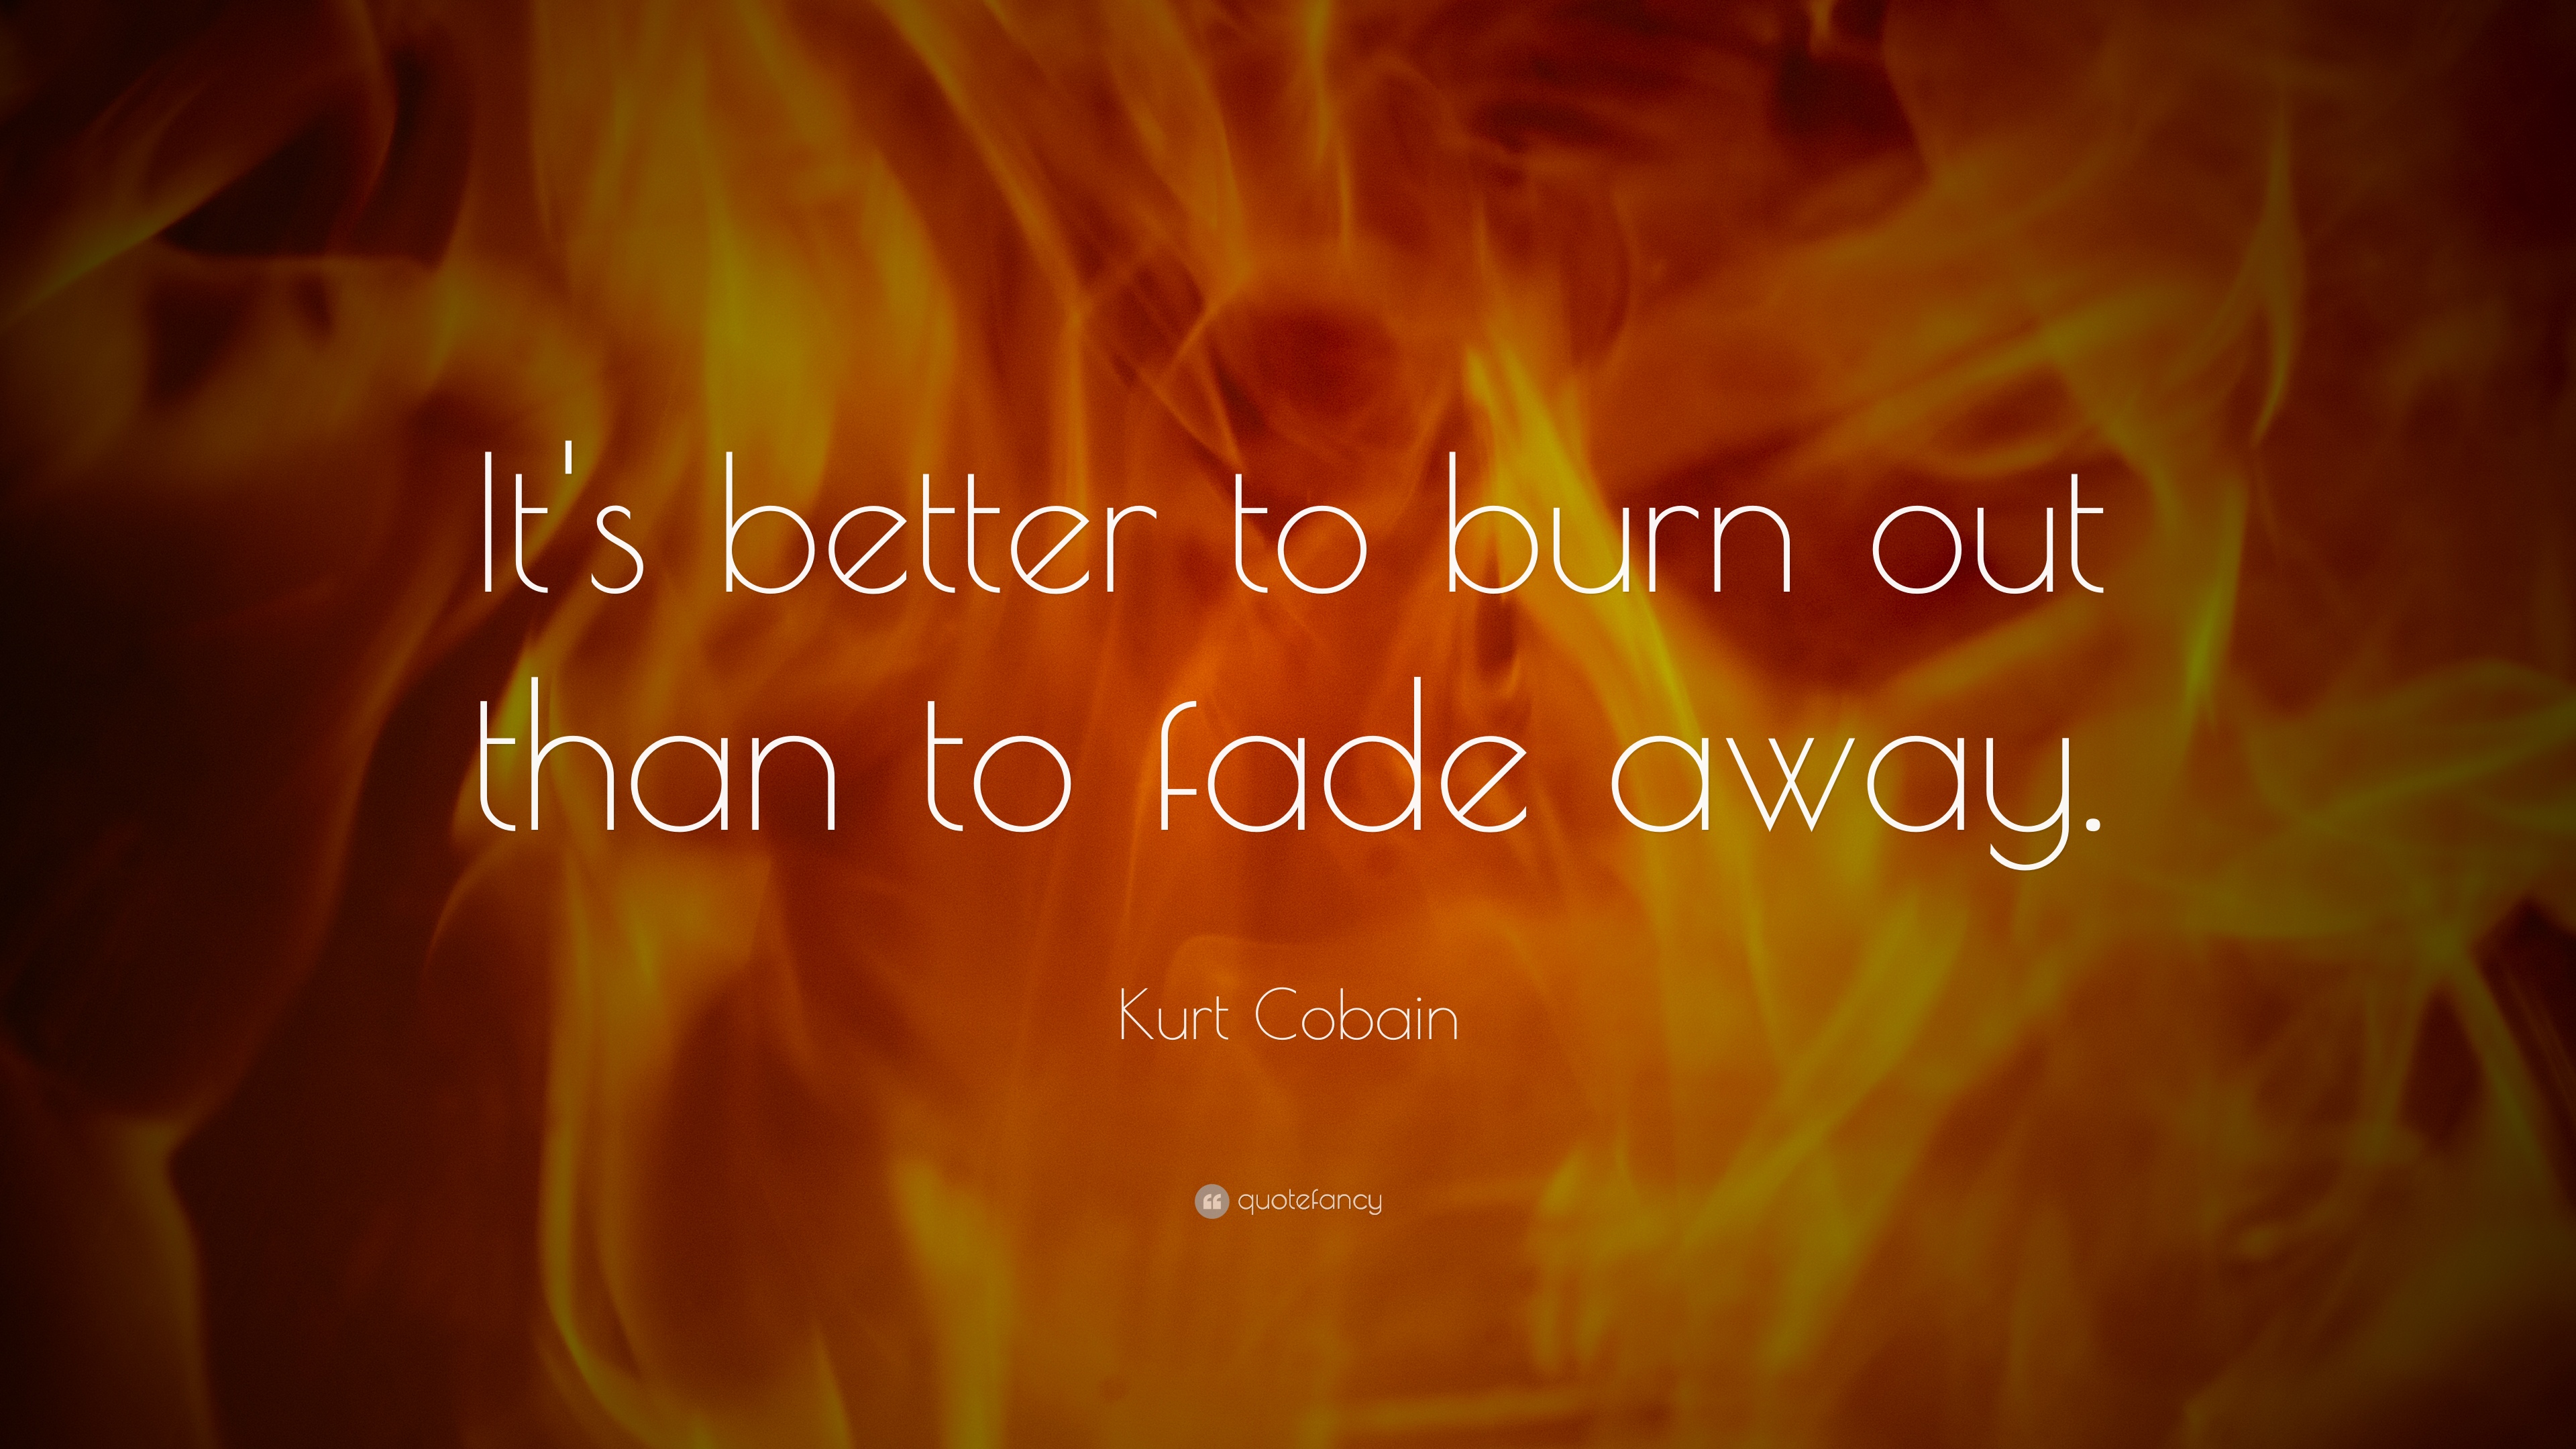 Kurt Cobain Quote: "It's better to burn out than to fade away. 